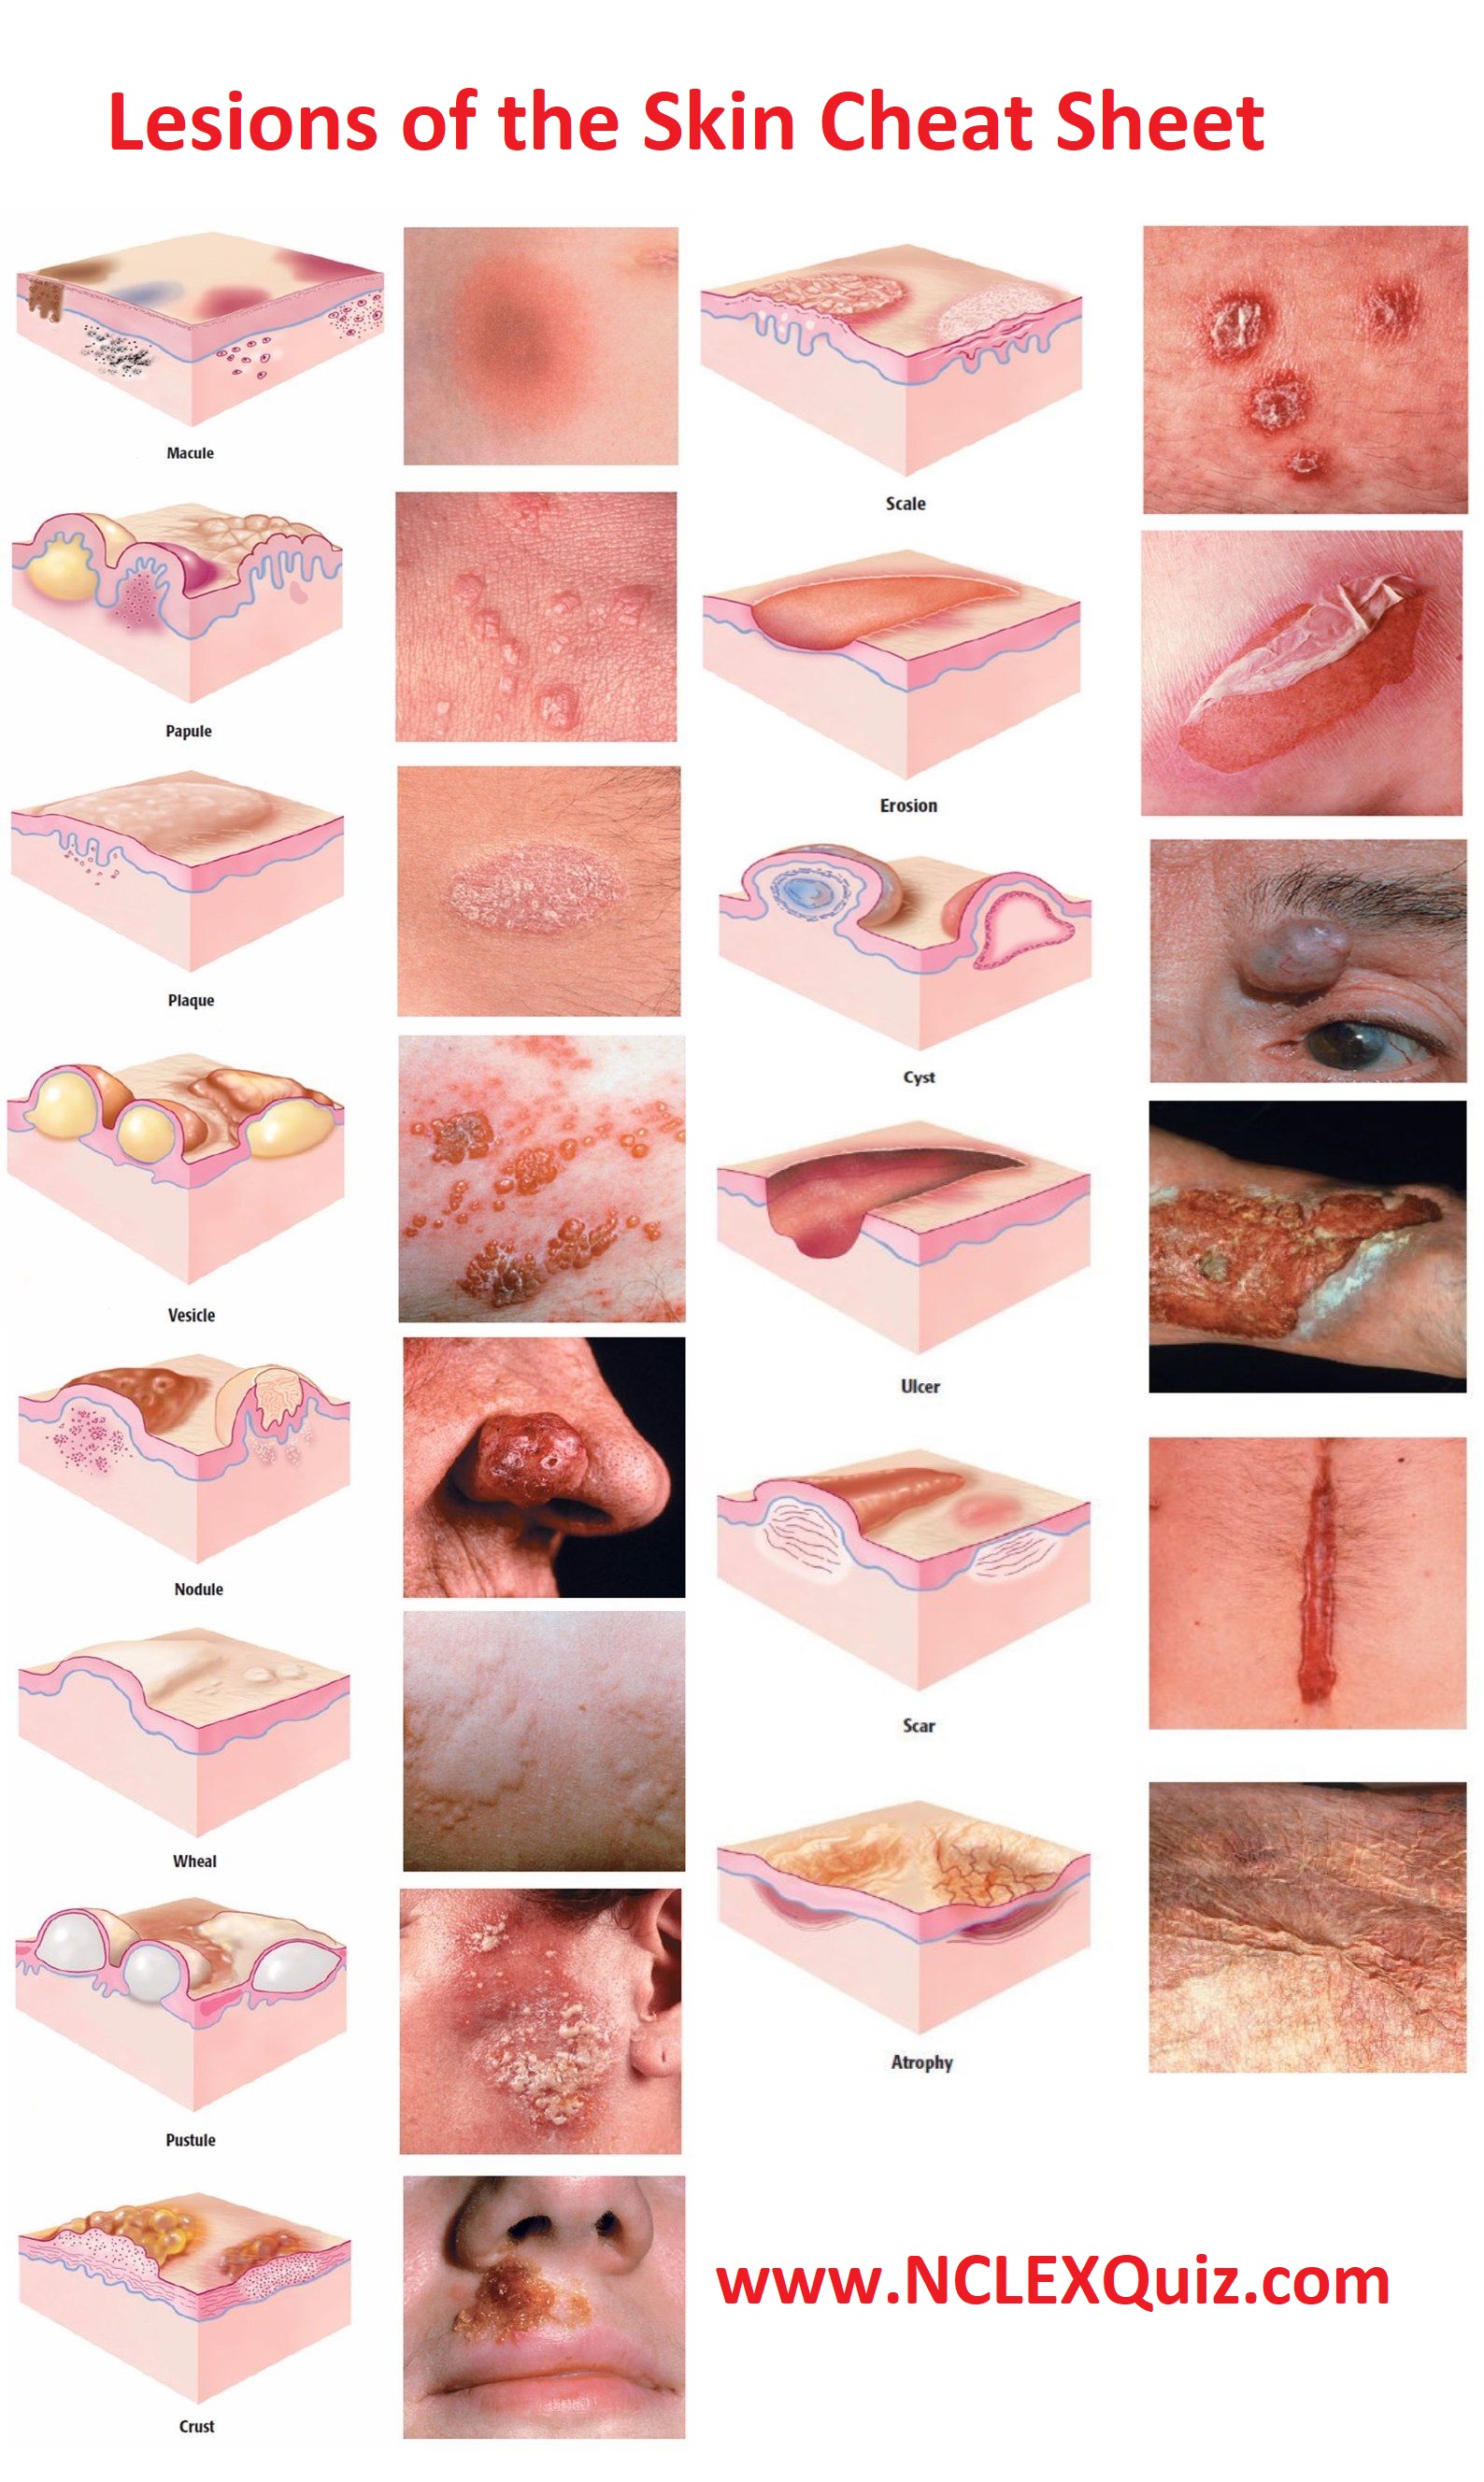 Types Of Skin Lesions Benign Skin Lesions Plastic Surgery Key Images And Photos Finder